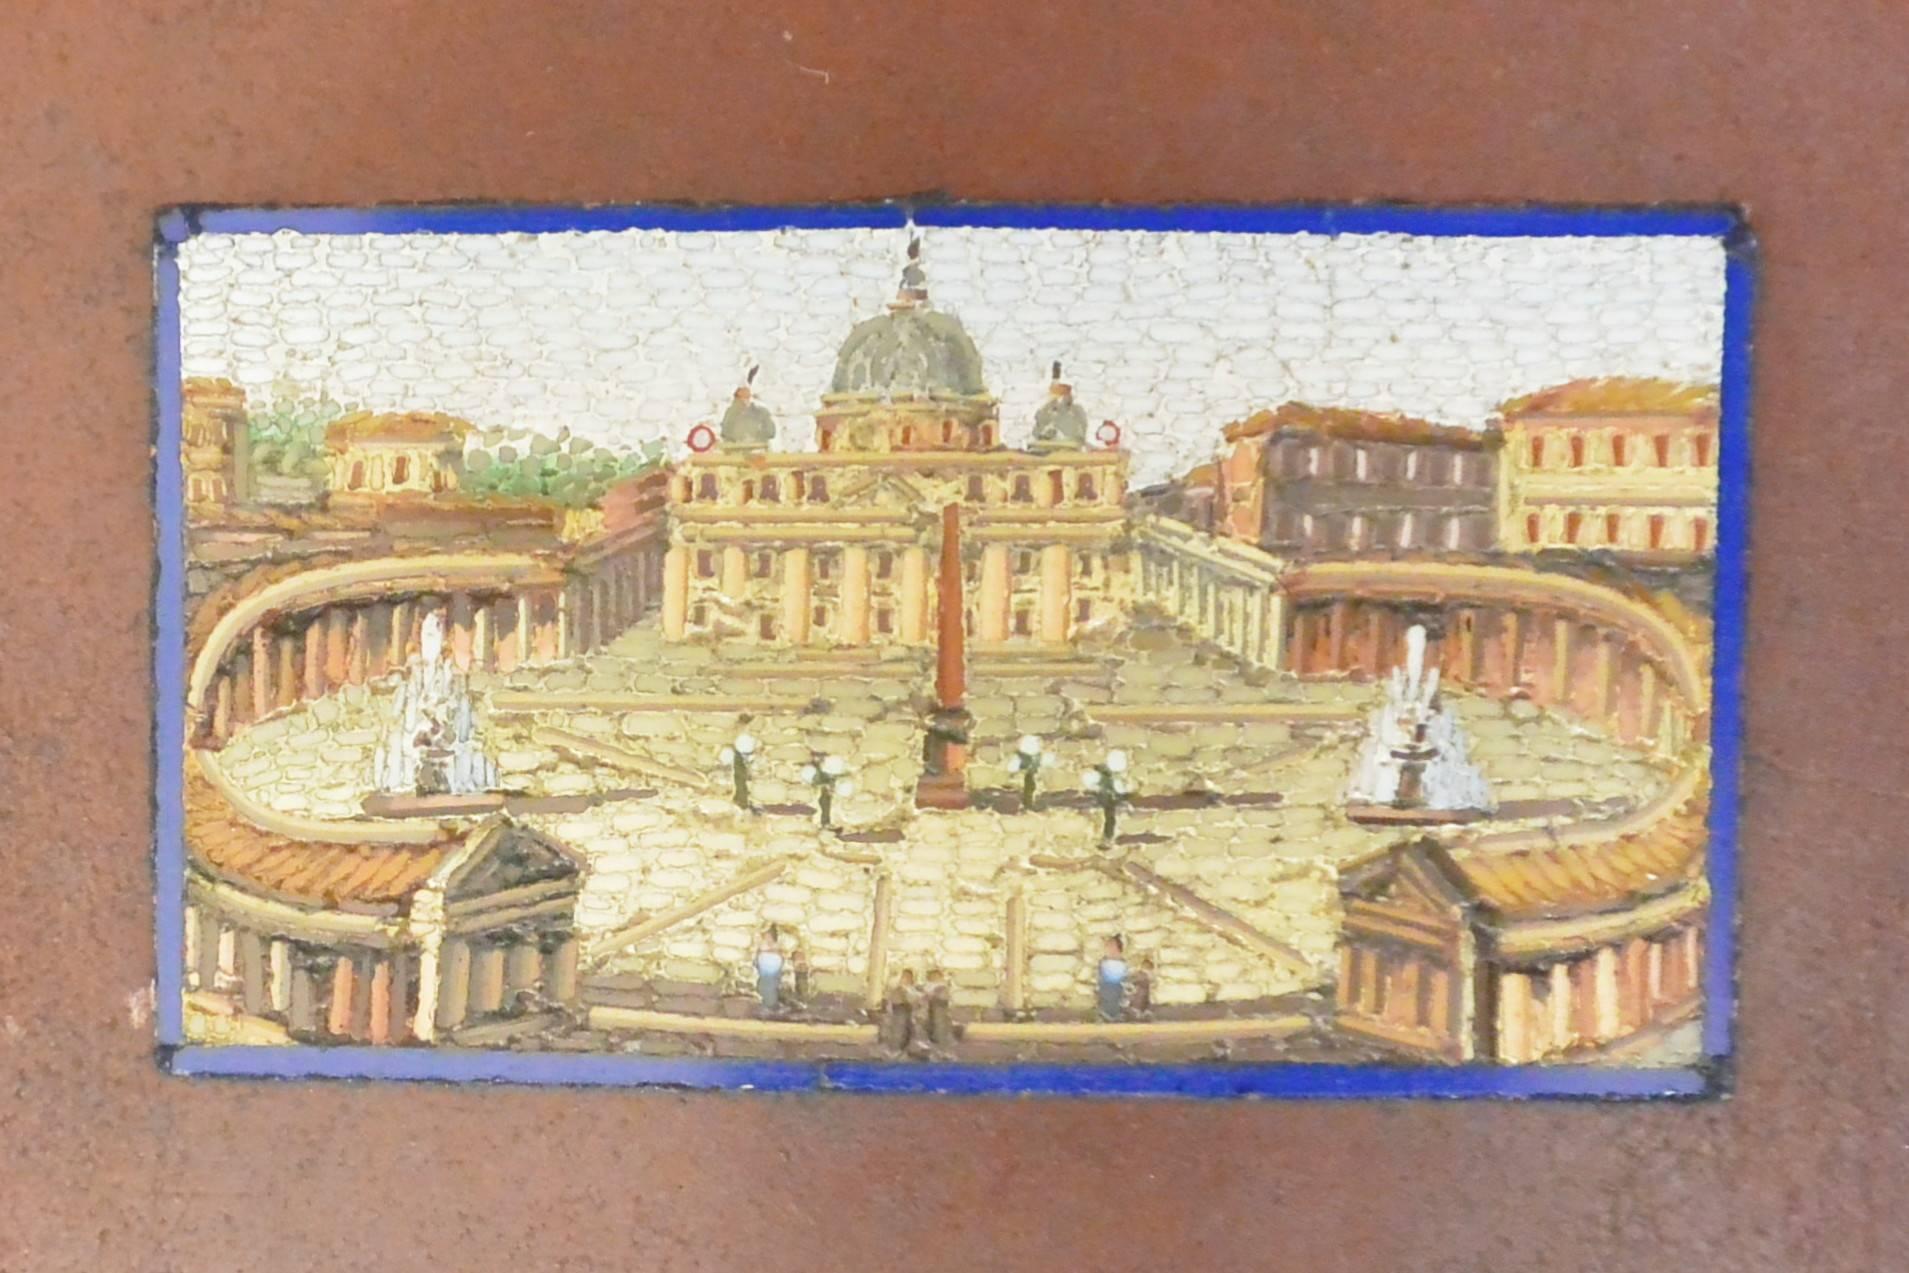 Antique silver mounted hardstone snuff box with micromosaic view of St. Peter's Cathedral, Rome. Italy, early 19th century. 
Dimension: 2.4